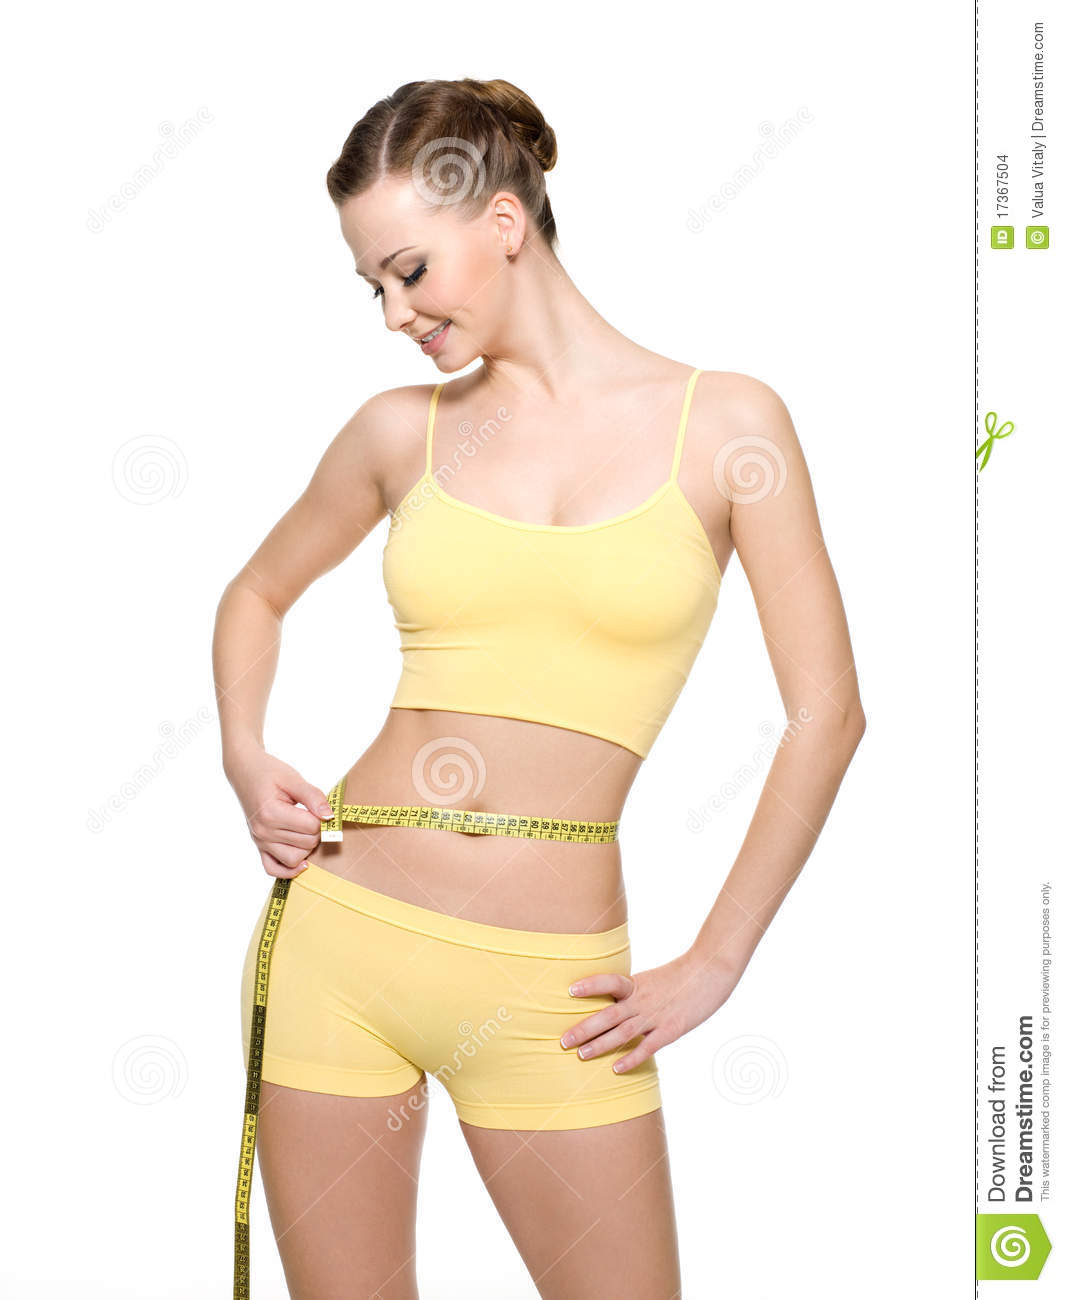 Smiling Woman Measuring Waist With Measurement Type Isolated On White